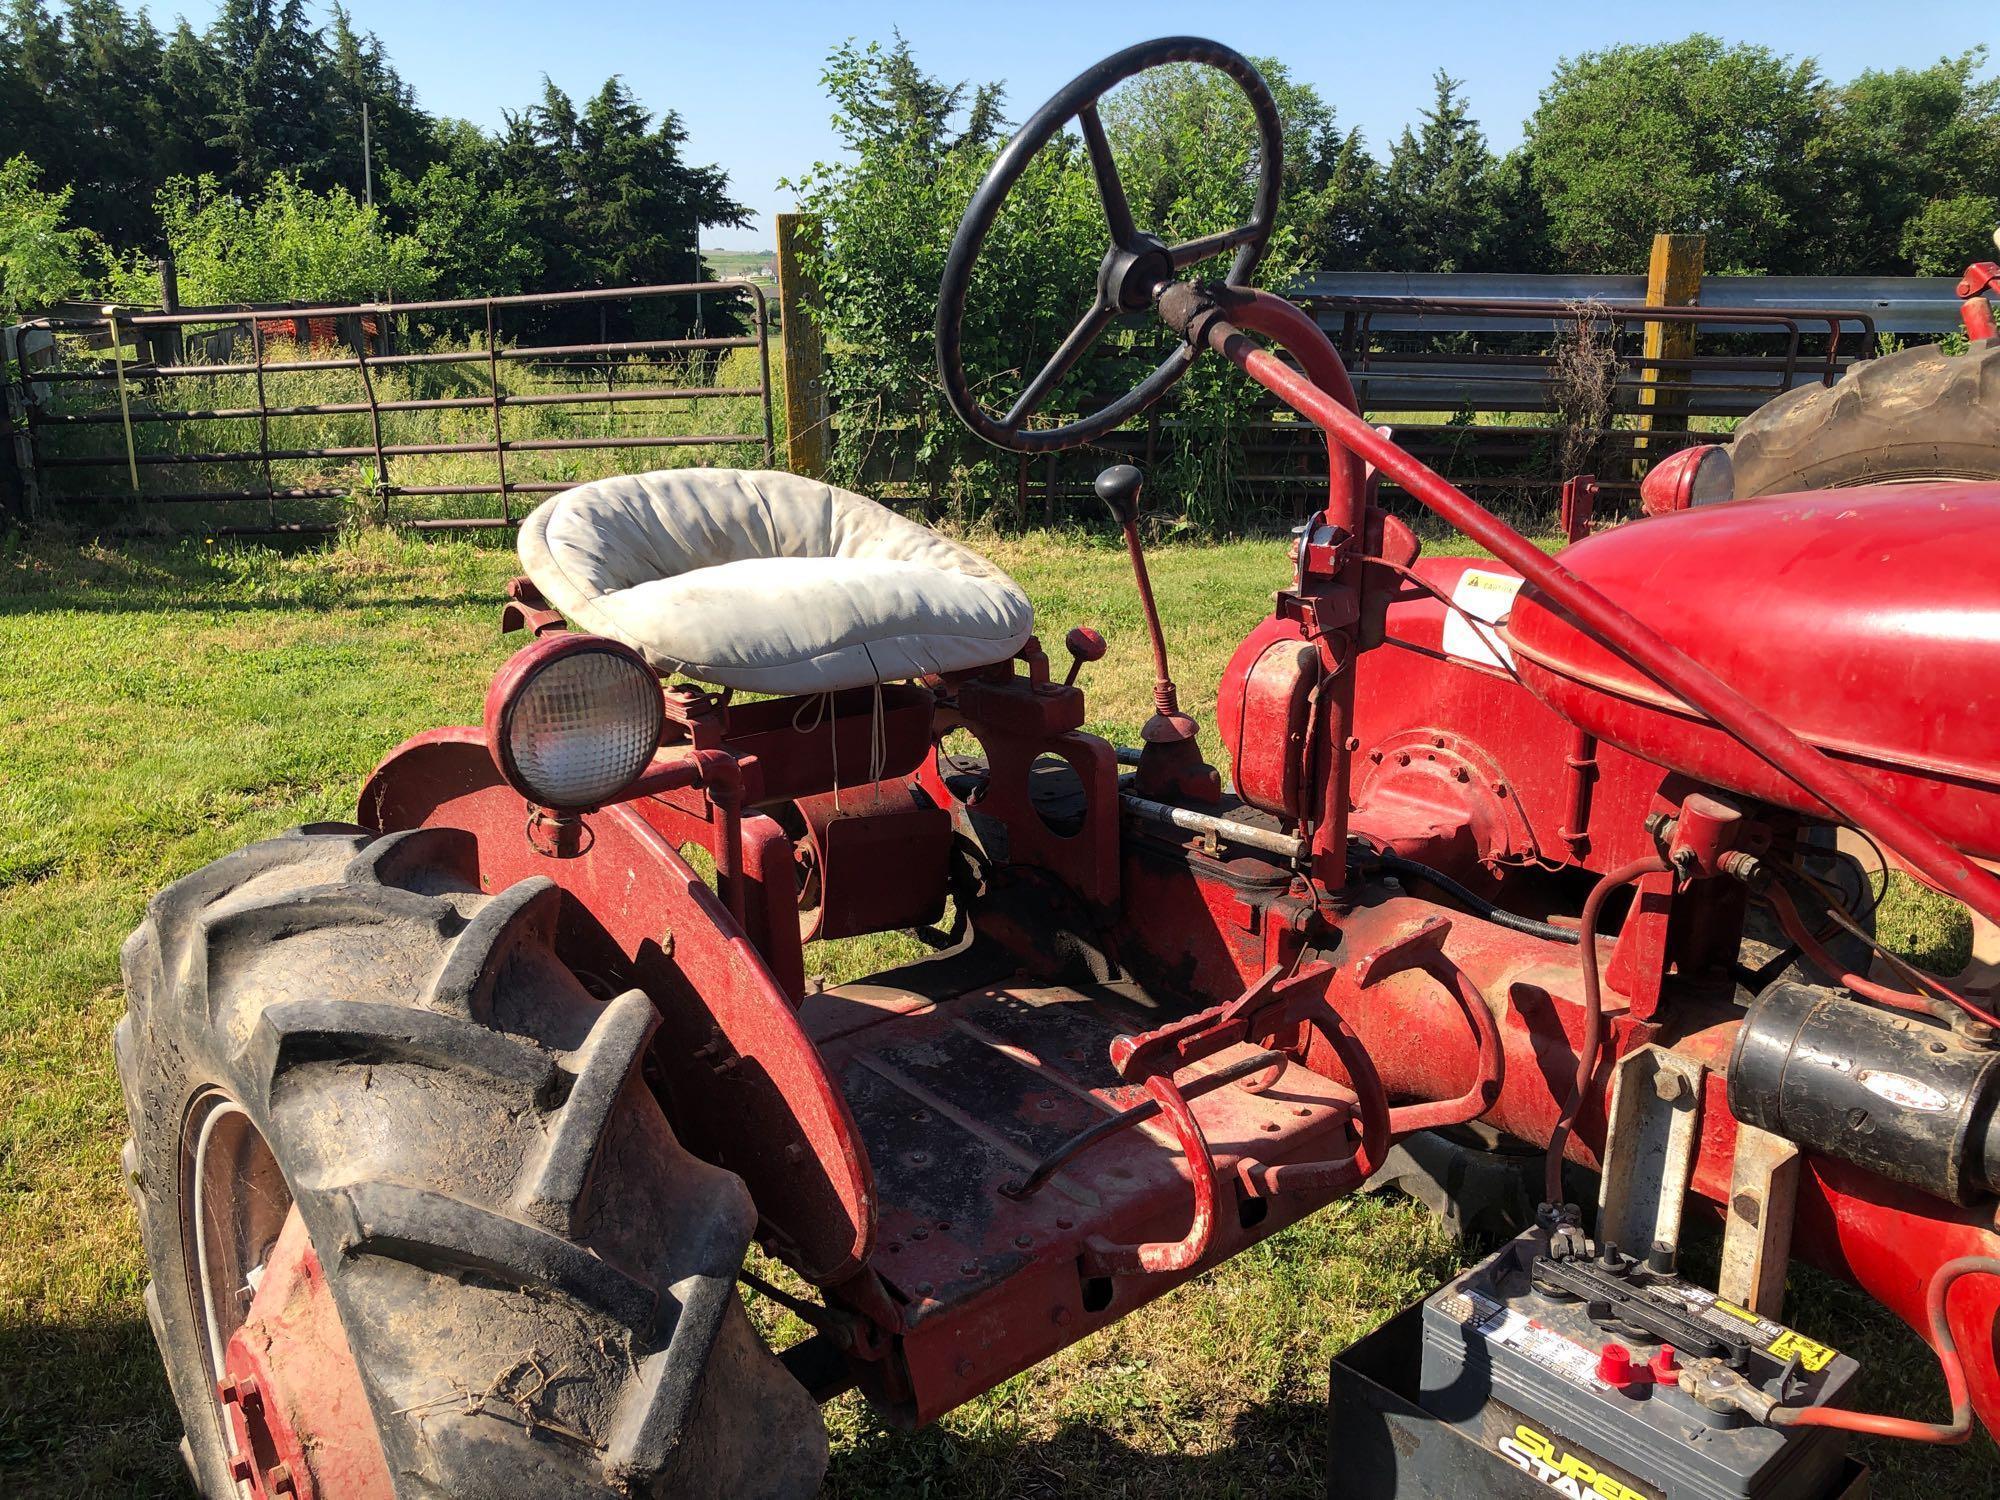 Farmall B Cultivision Narrow Front Tractor, Gas, SN:182916